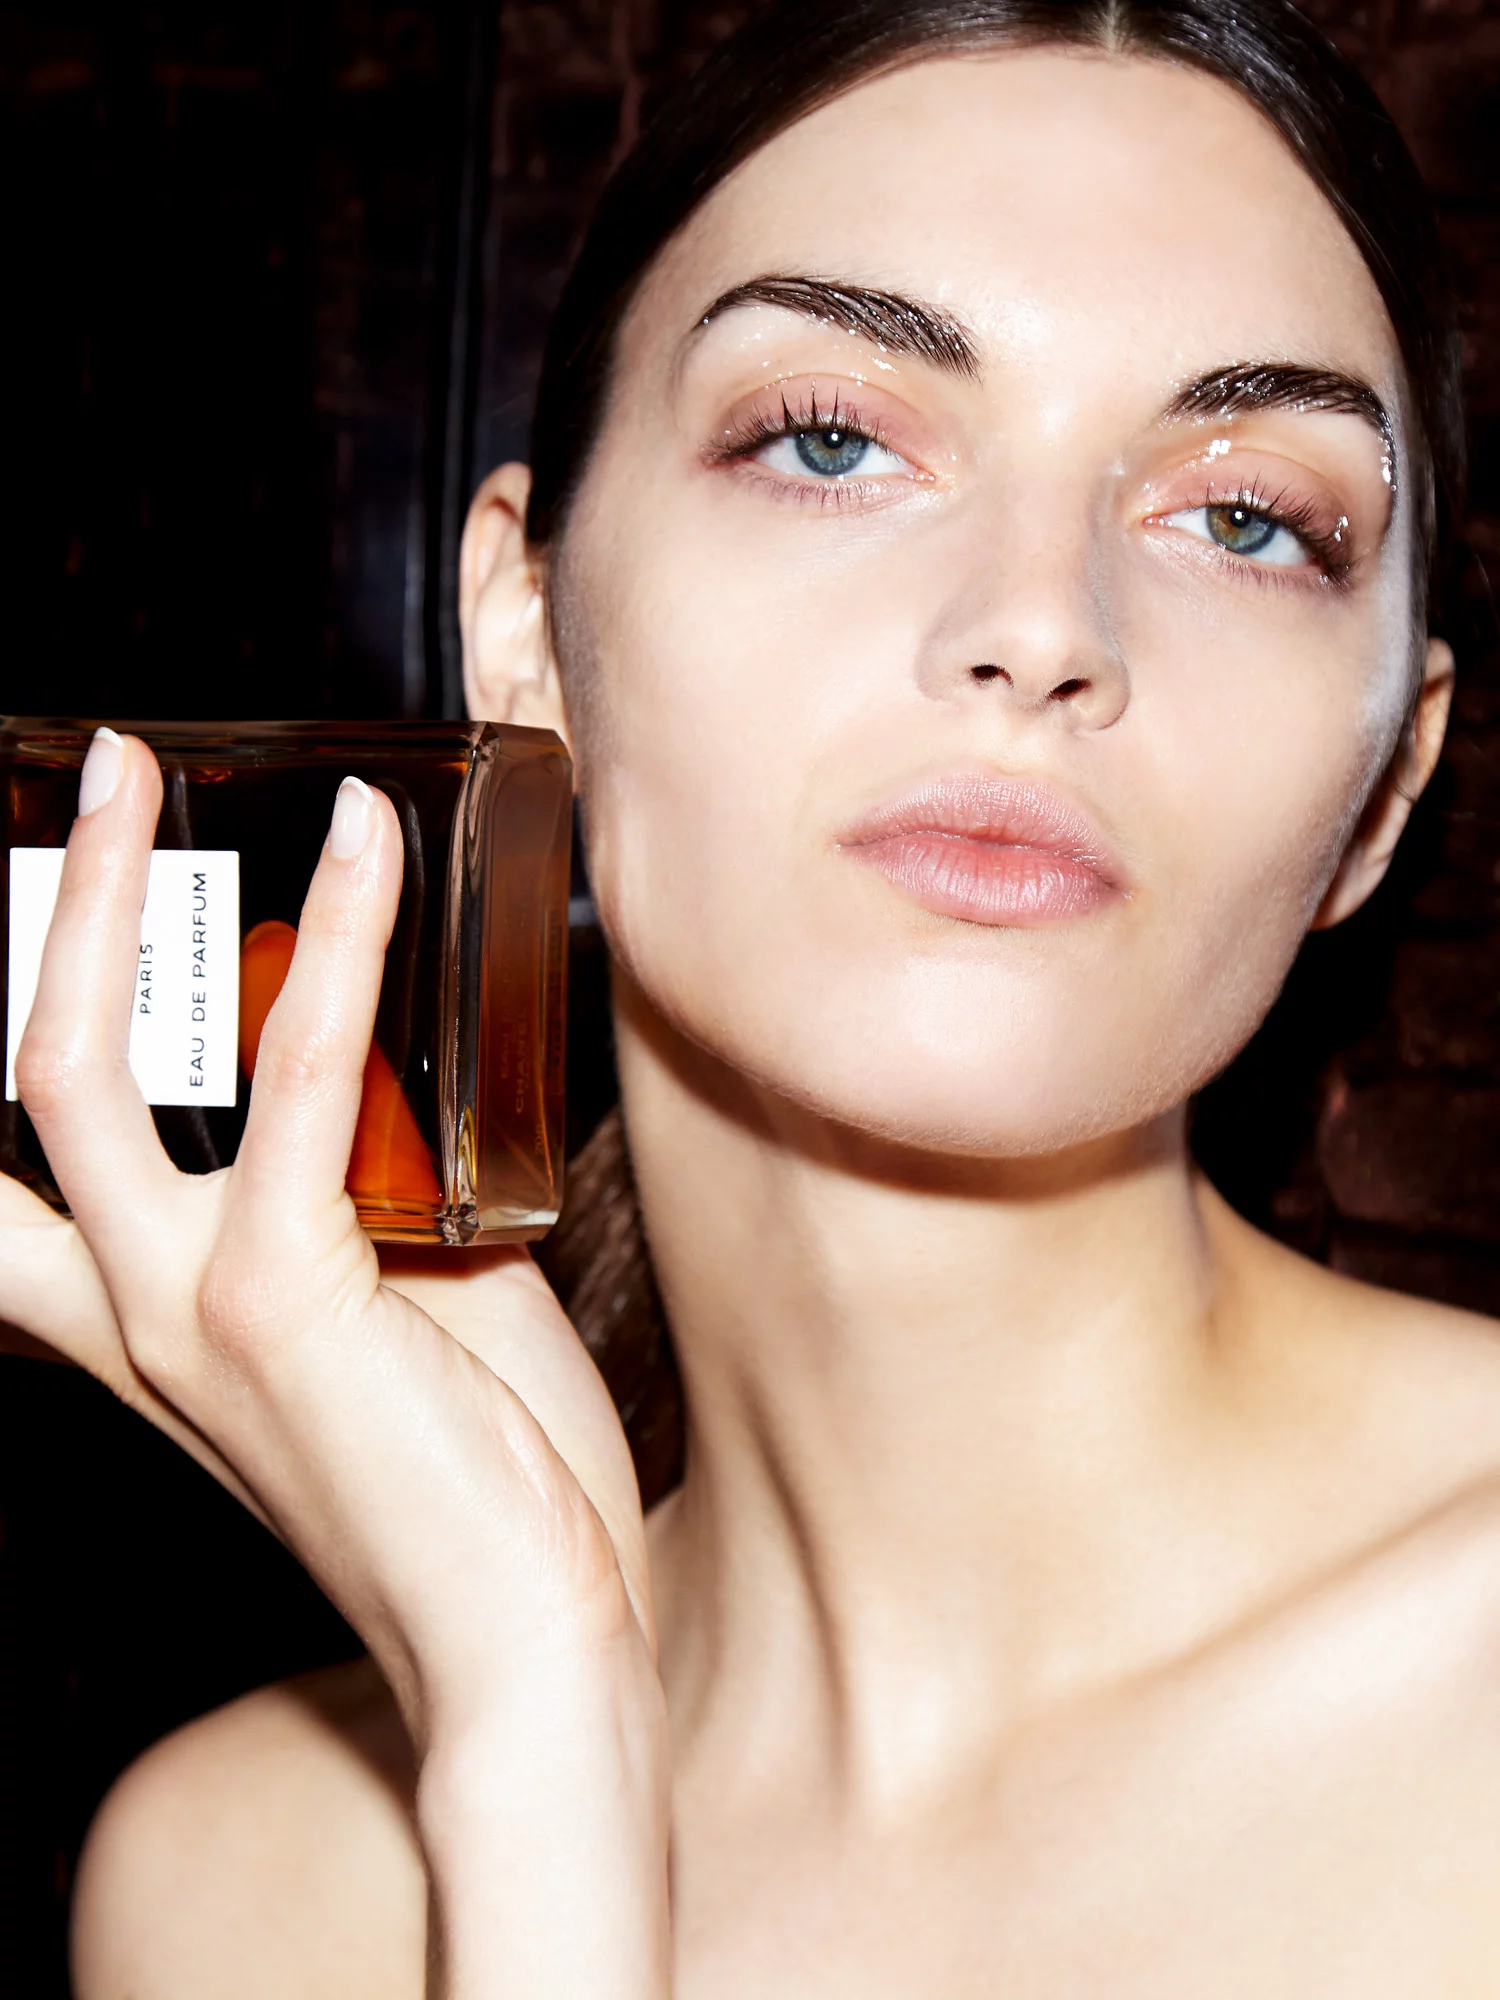 Chanel Beauty 2 by Claire ROTHSTEIN